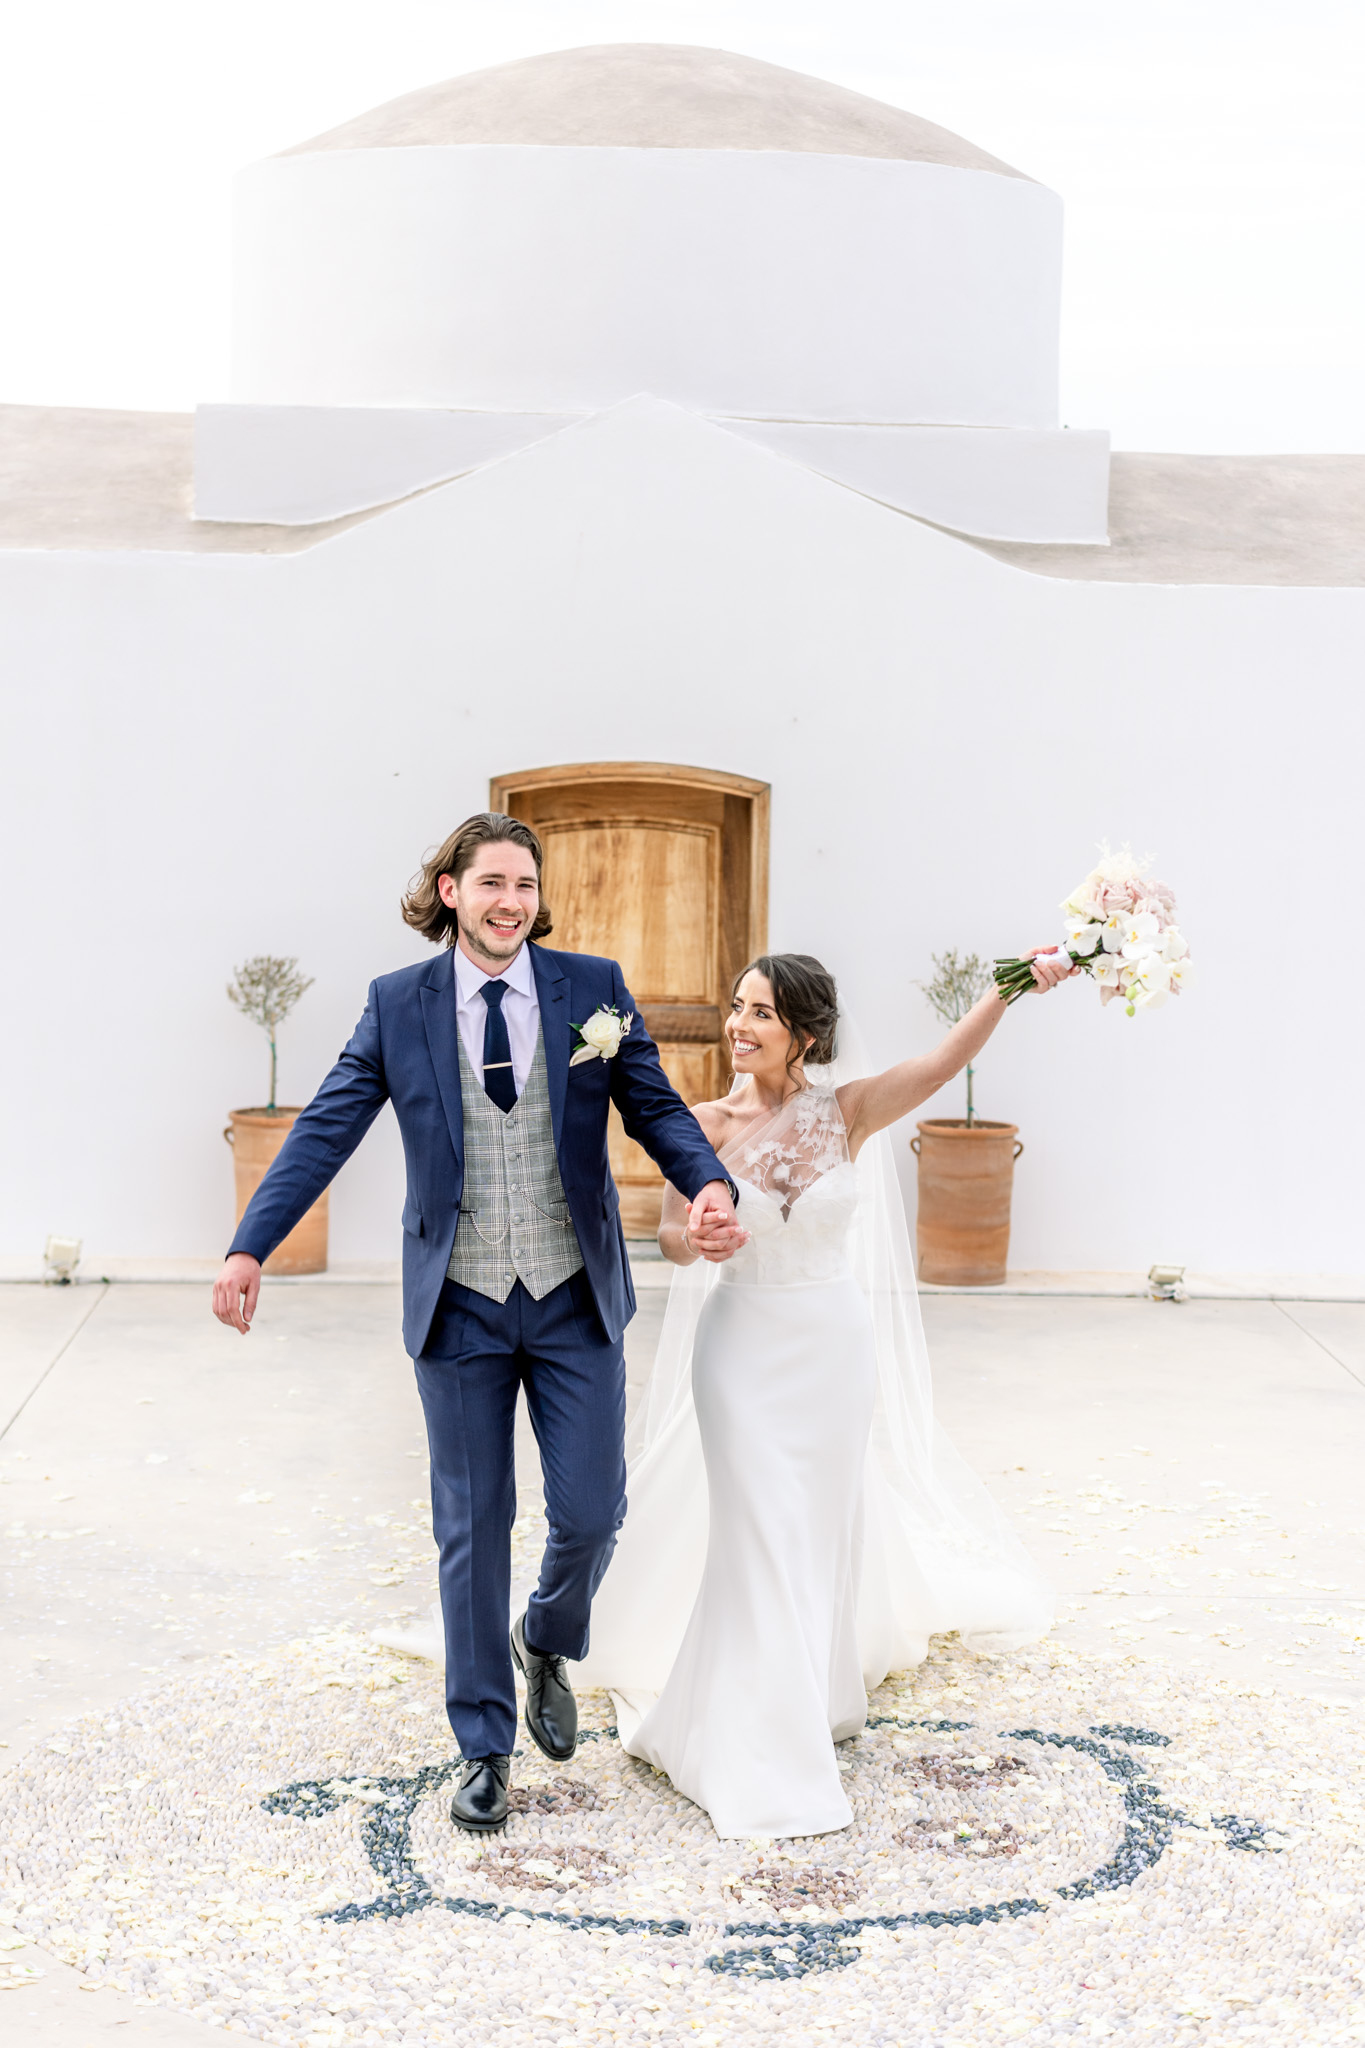 https://usercontent.one/wp/www.natalieandmax.co.uk/wp-content/uploads/2022/06/KN-Ktima-Lindos-Wedding-Photography-by-Natalie-and-Max-Photo-and-Films-578.jpg?media=1711985334